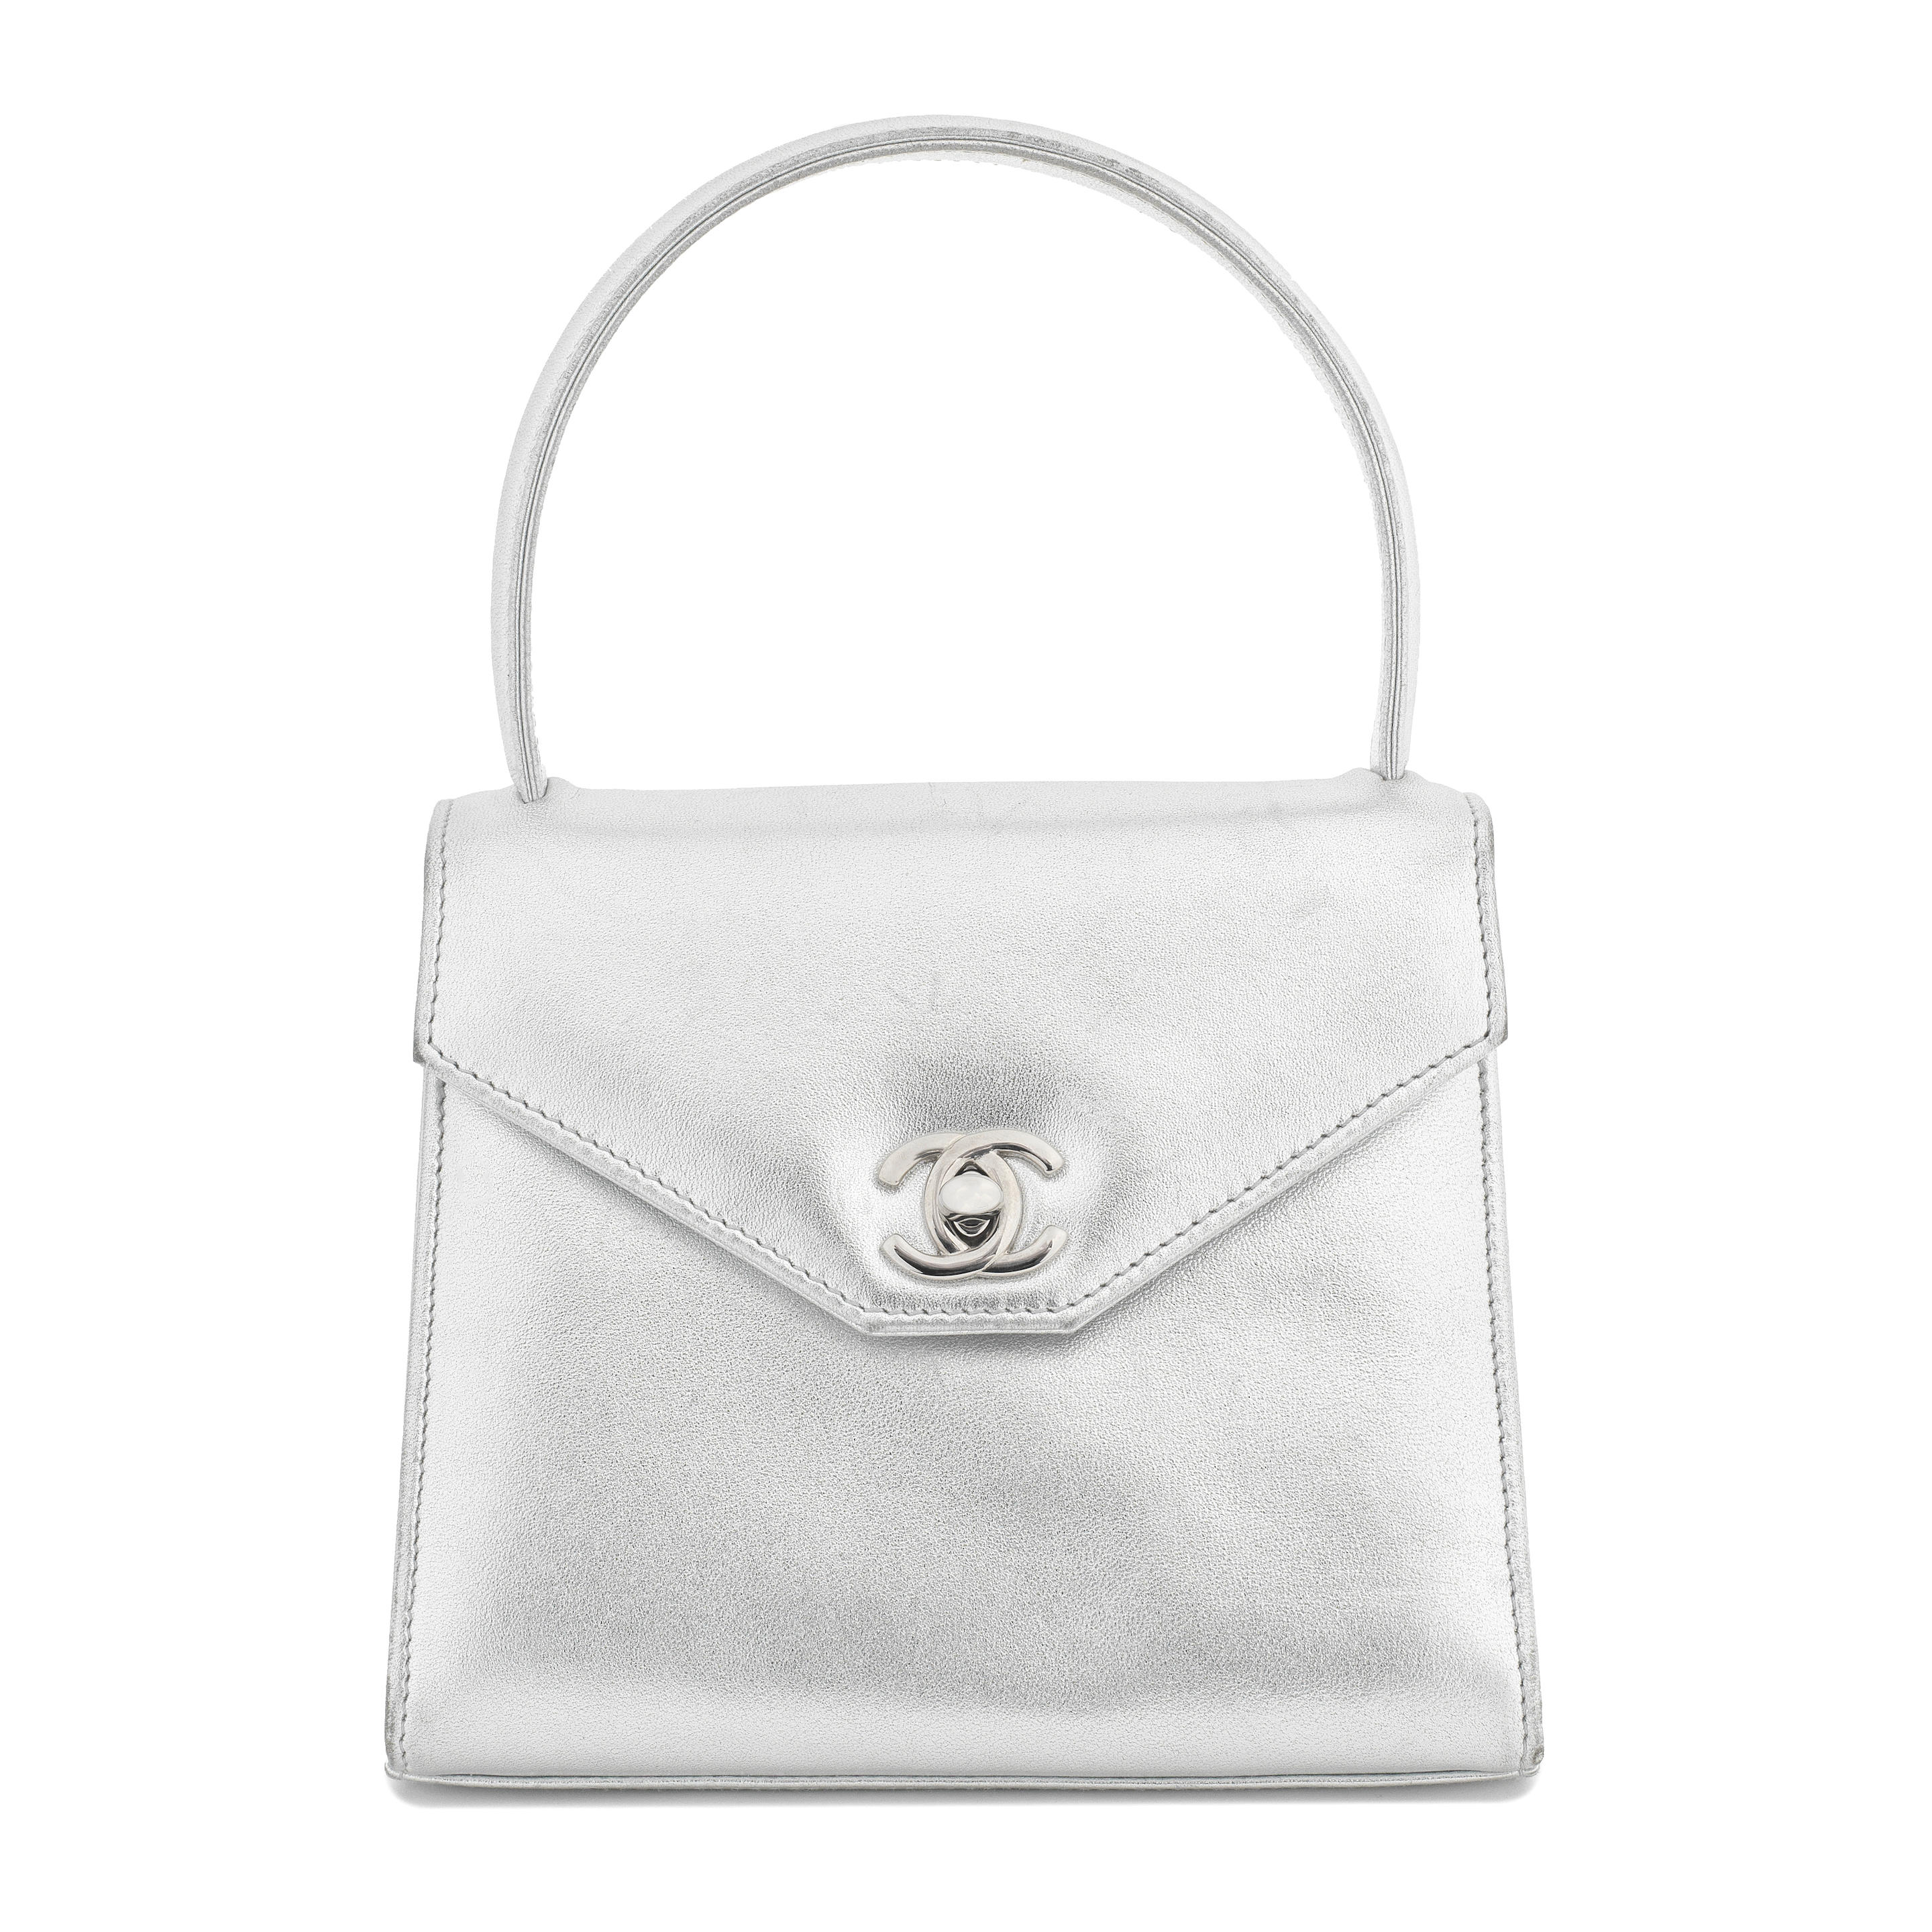 Bonhams : Karl Lagerfeld for Chanel a Metallic Silver Top Handle Mini Kelly  Bag 1996-97 (includes serial sticker, authenticity card, care booklet and  dust bag)